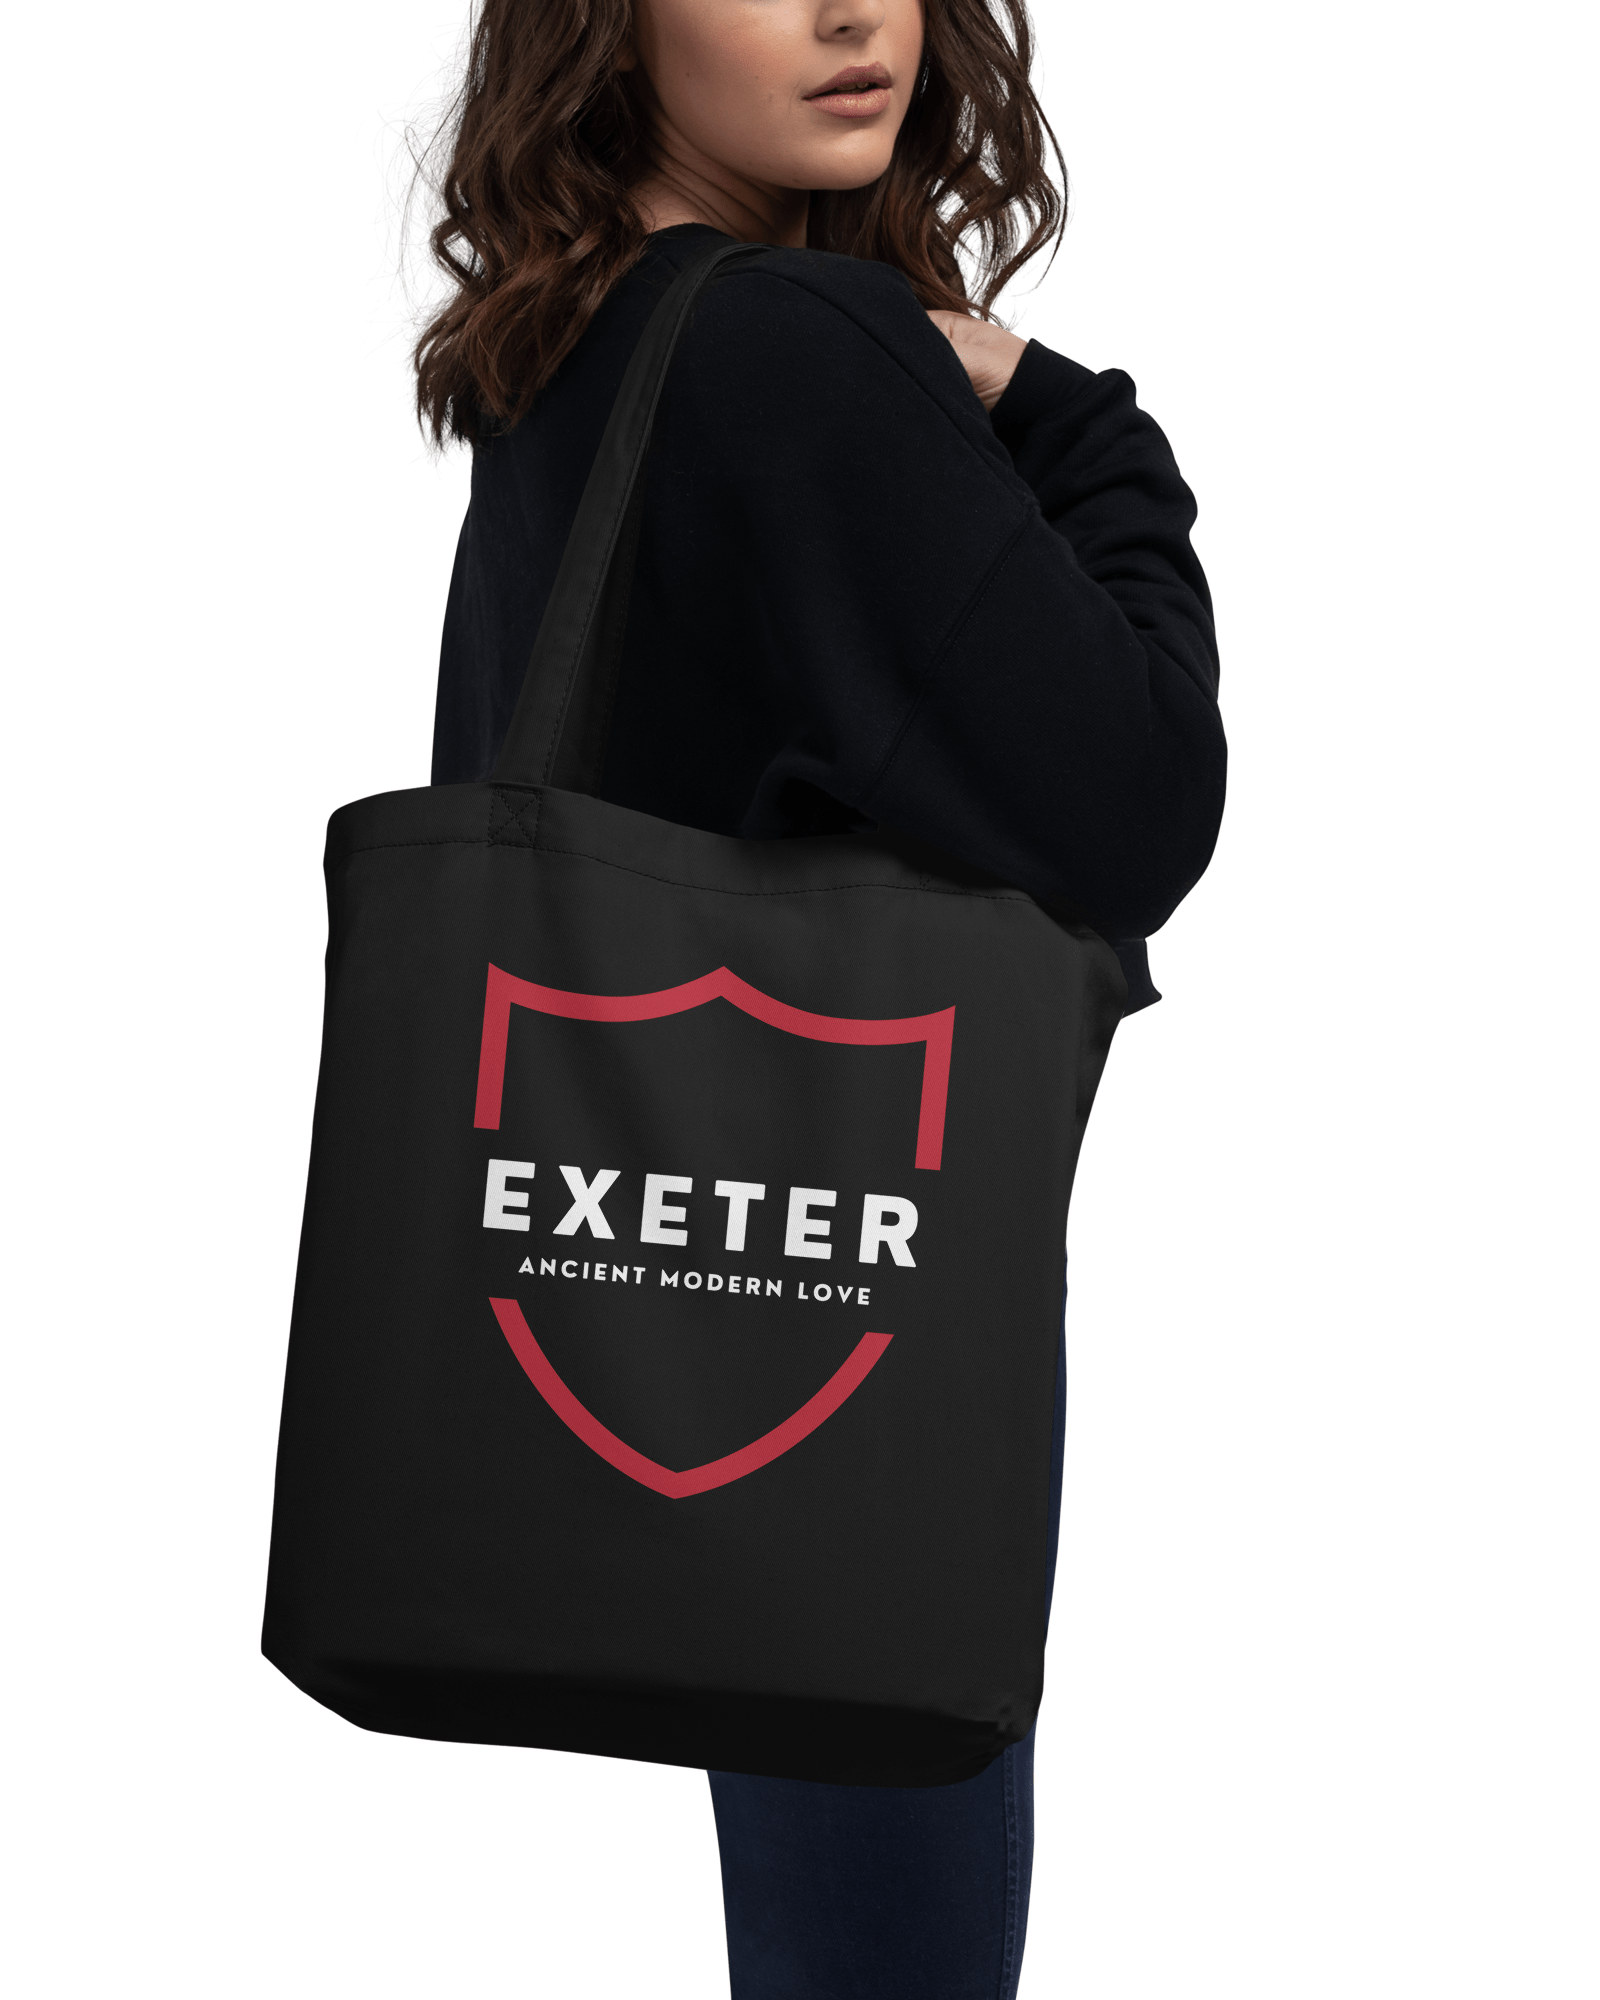 Exeter Ancient Modern Love Tote Bag Tote Bag Jolly & Goode